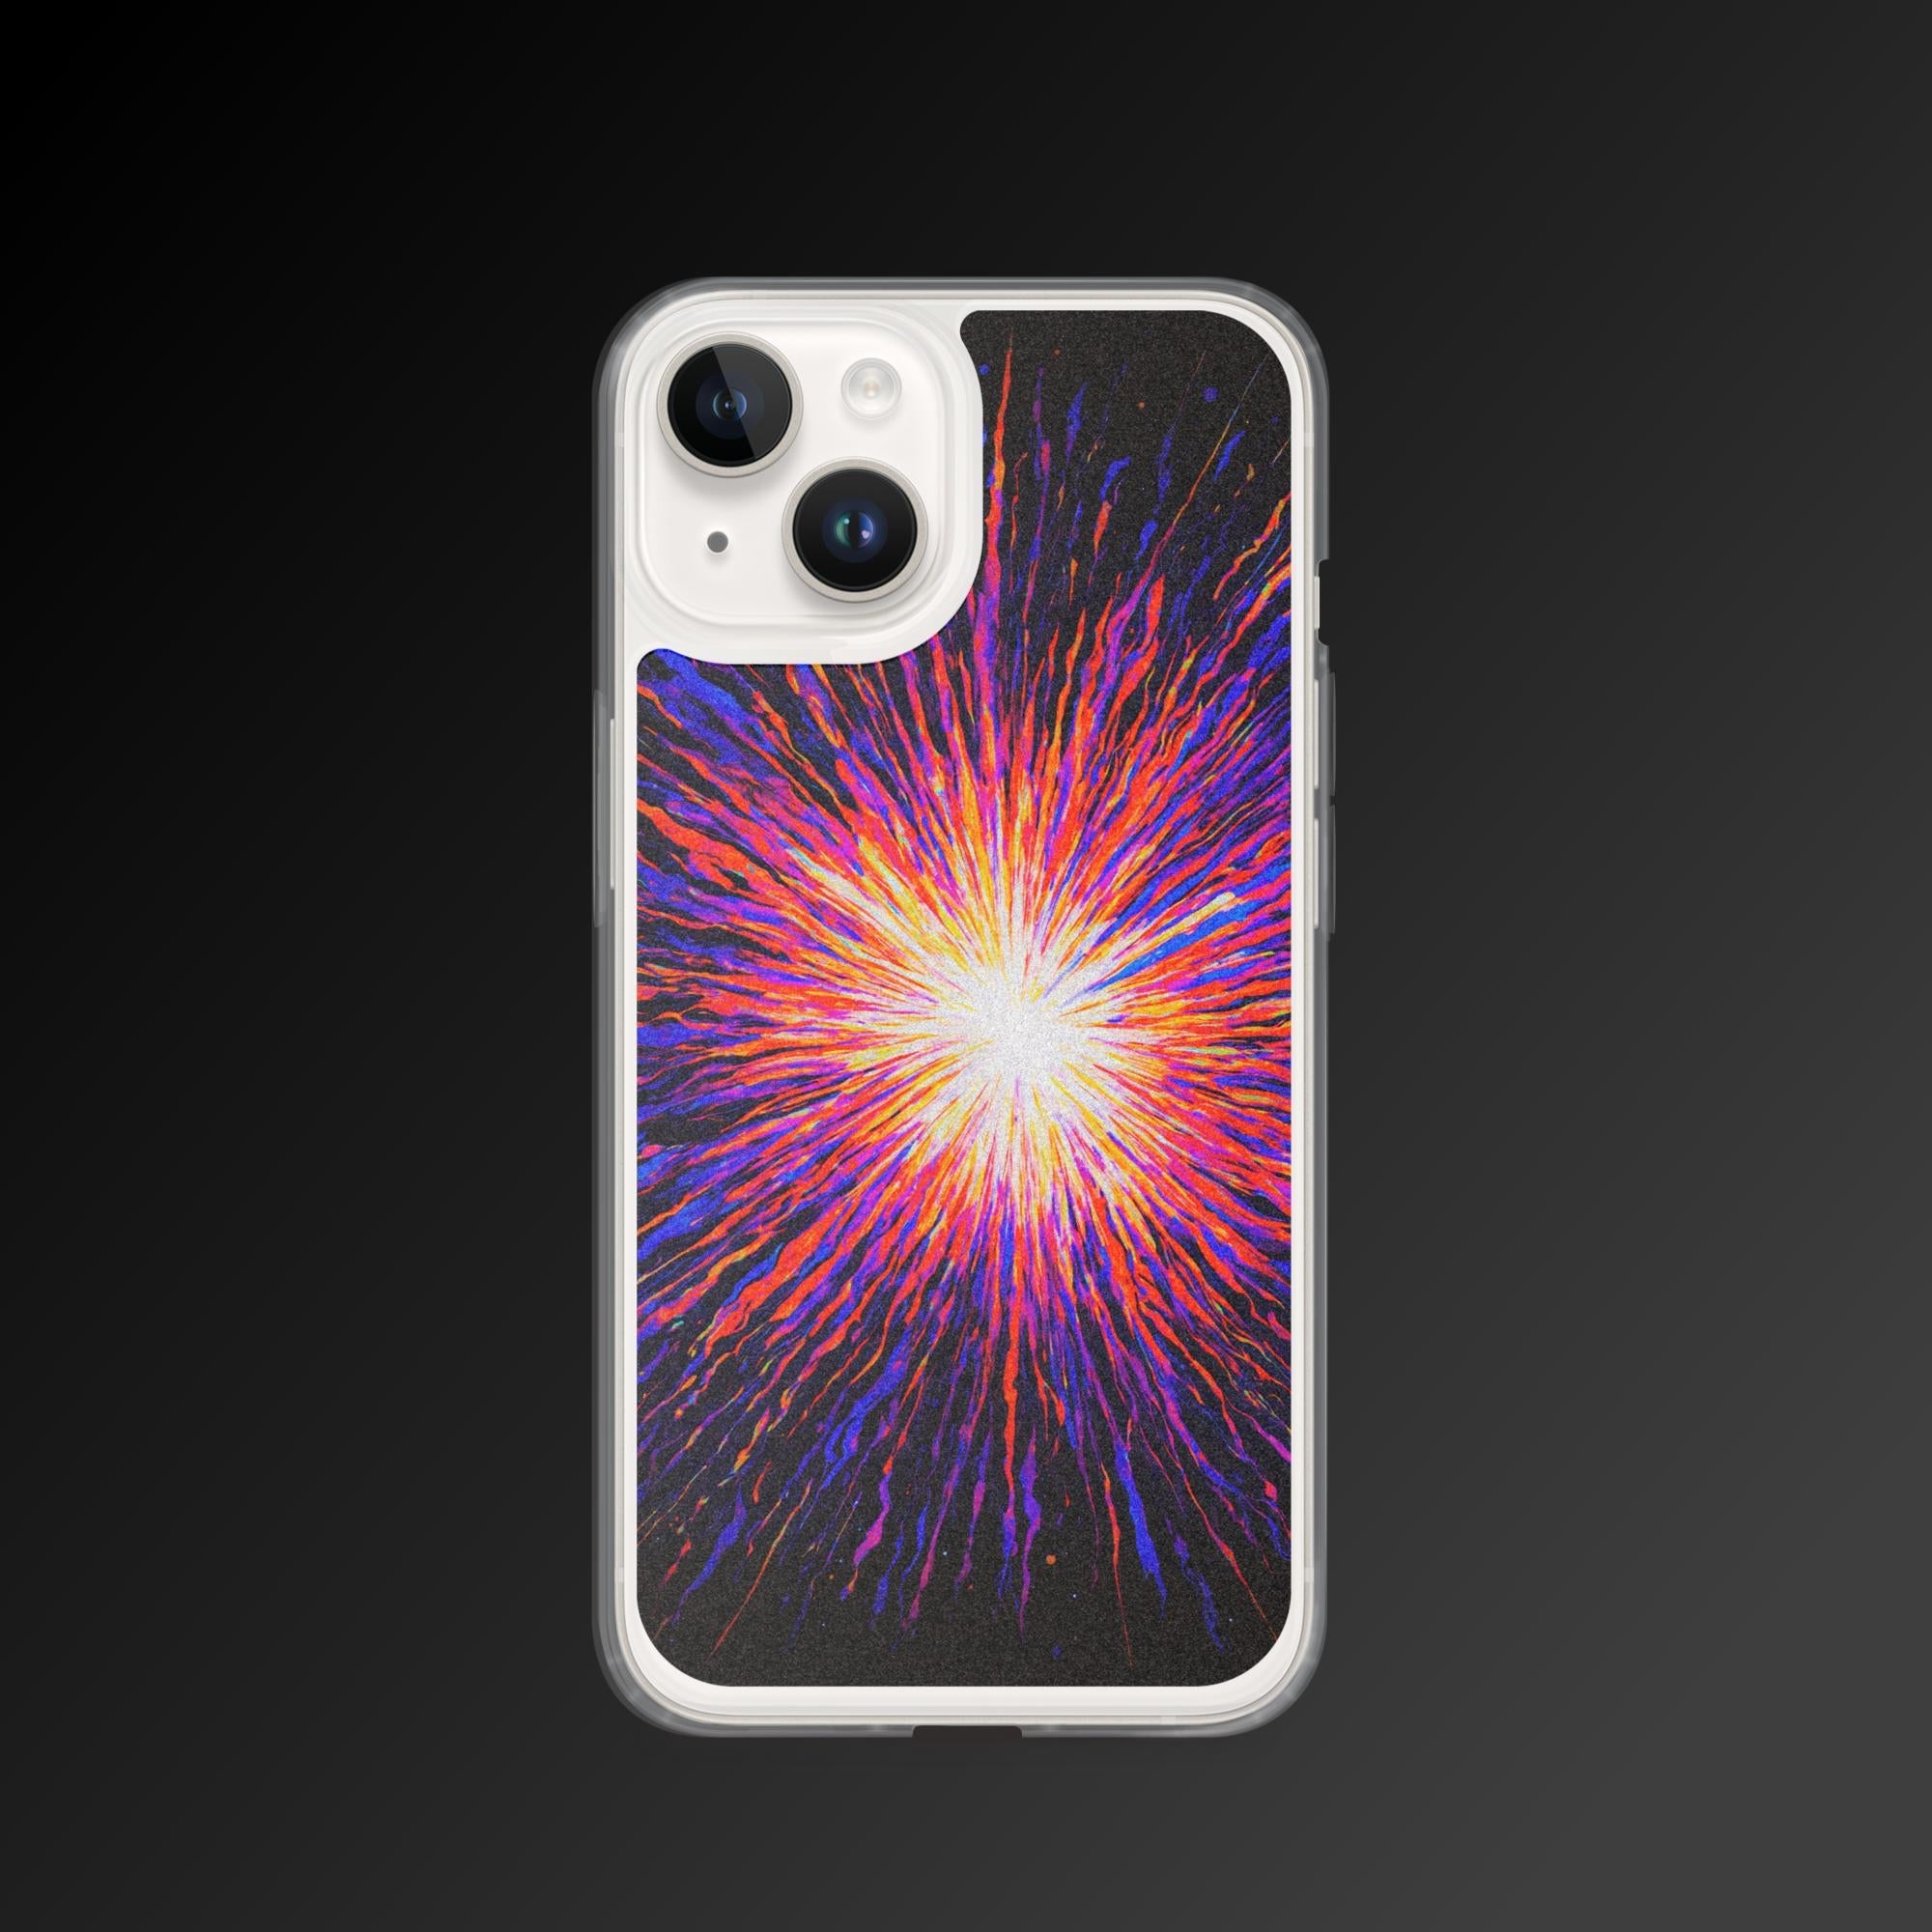 "Violet star surge" clear iphone case - Clear iphone case - Ever colorful